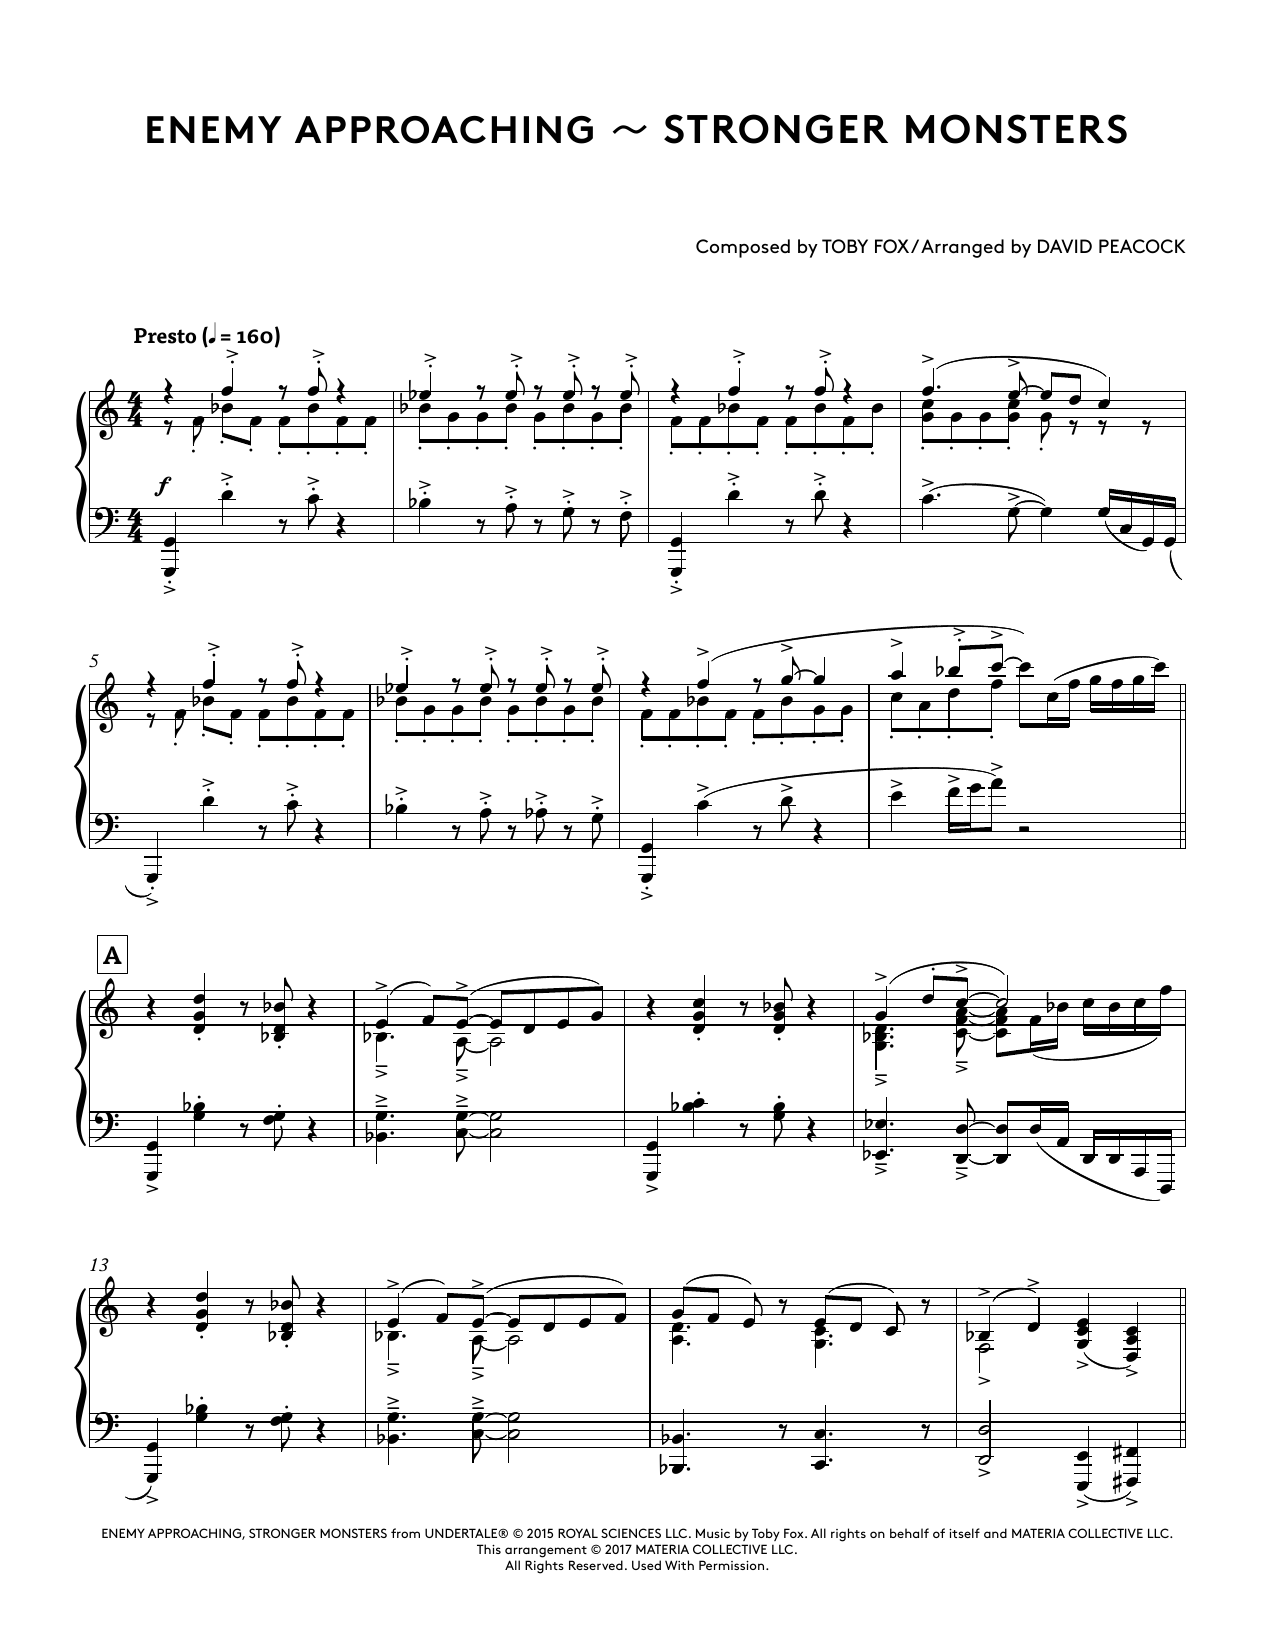 Download Toby Fox Enemy Approaching - Stronger Monsters ( Sheet Music